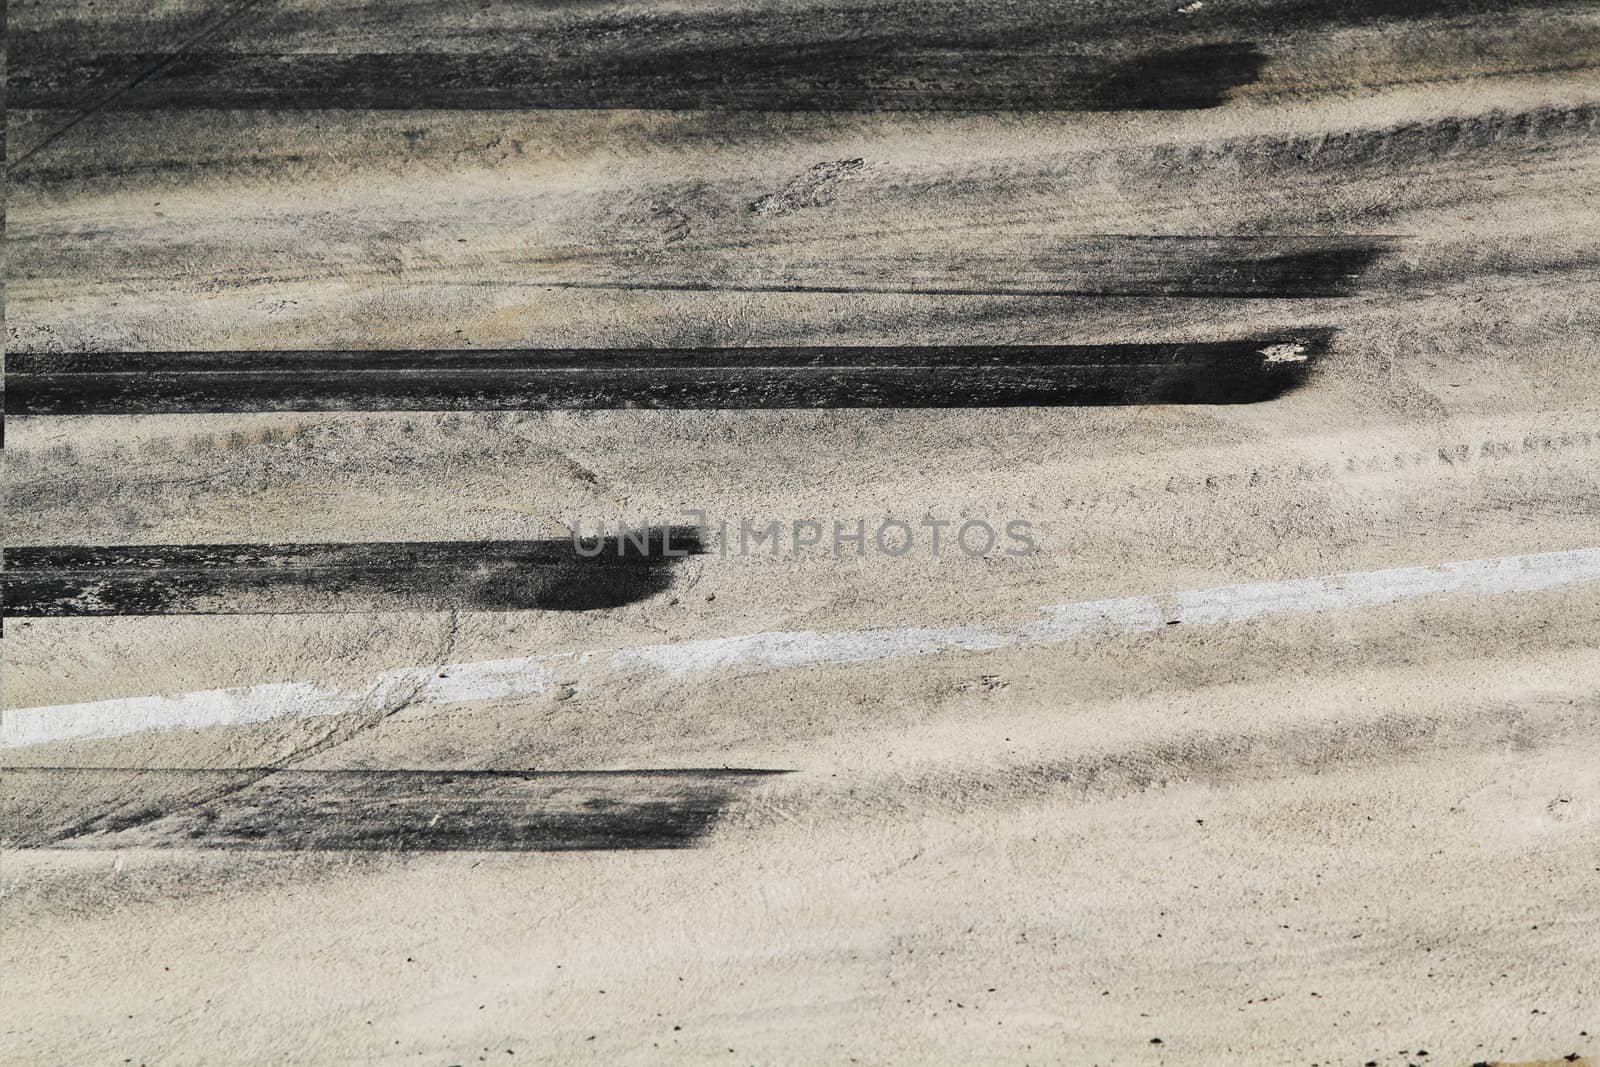 Background with tire marks on road track